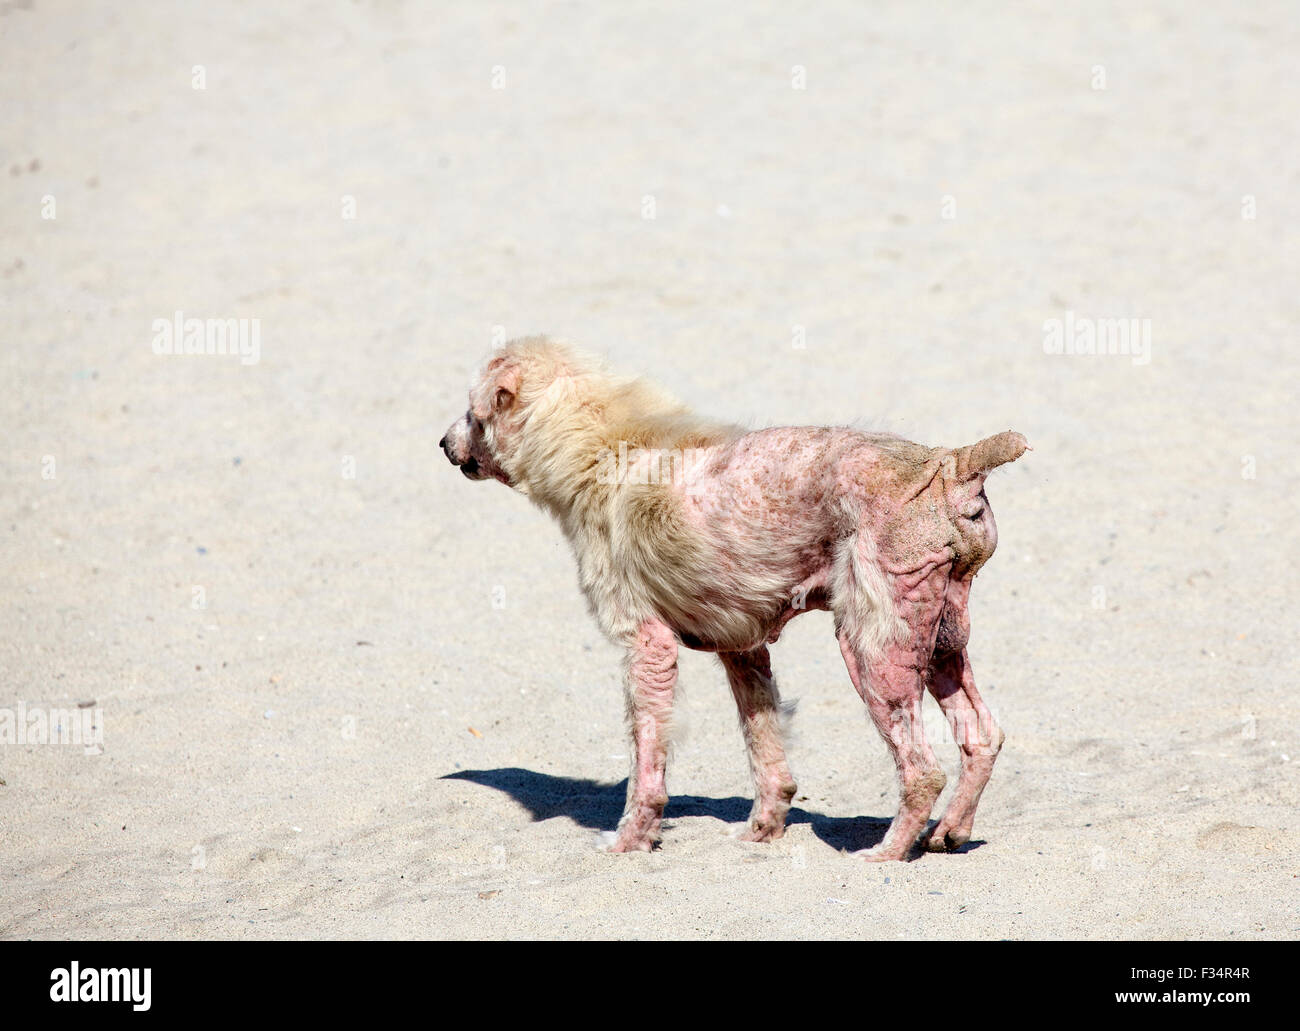 A dog with a severe case of mange, a skin disease caused by parasitic mites. Stock Photo